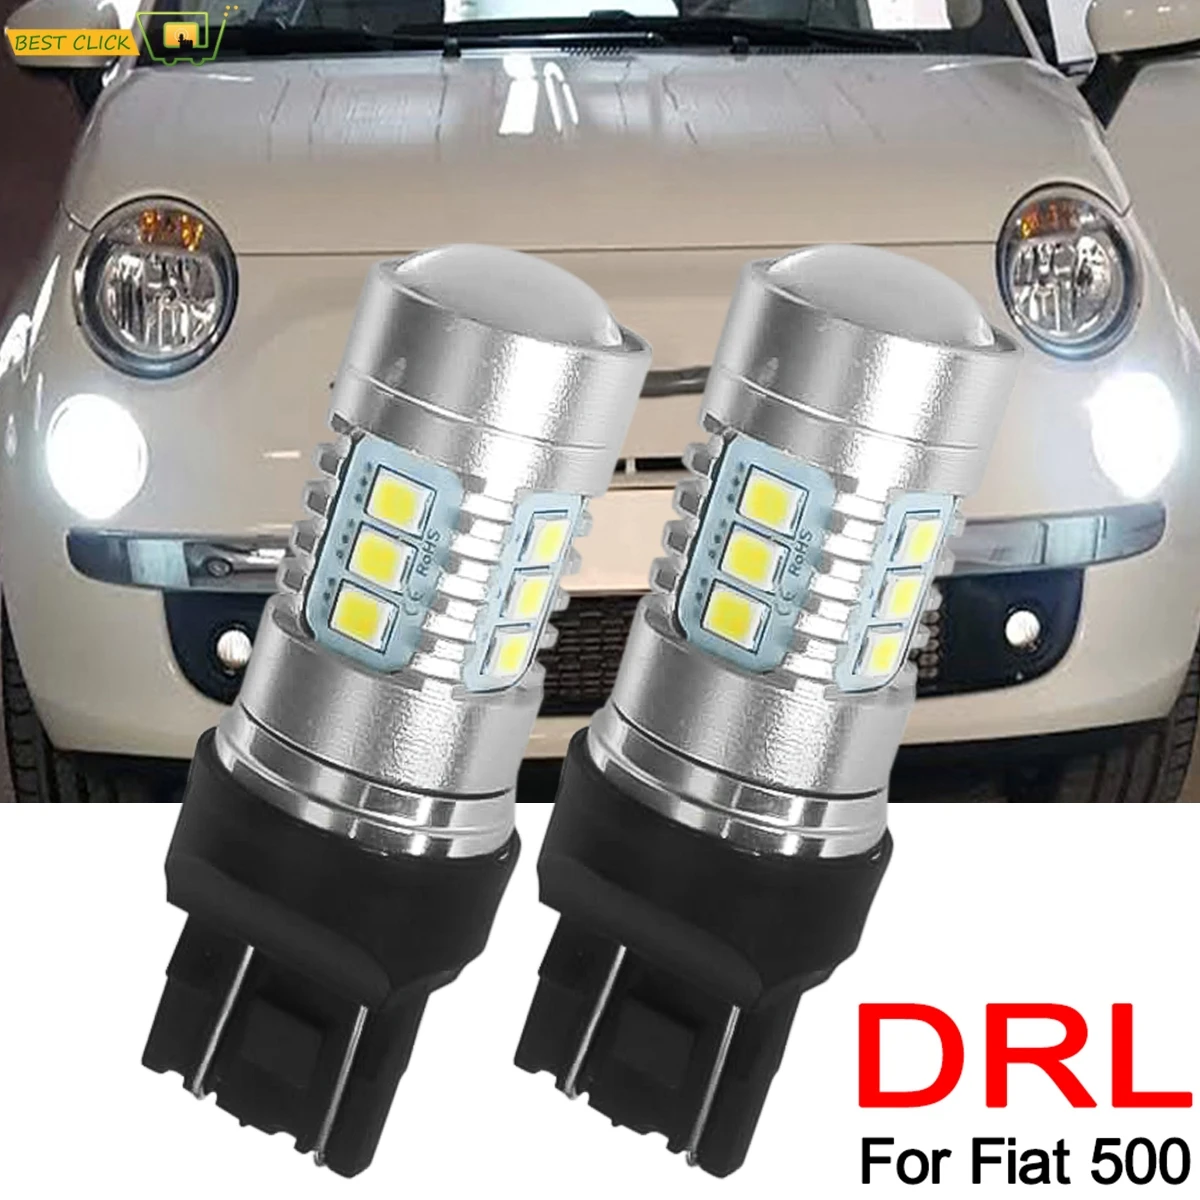 PAIR 7443 580 T20 30x 3030smd LED 1500lm bulbs 5W/21W DRL For Fiat 500 ABARTH